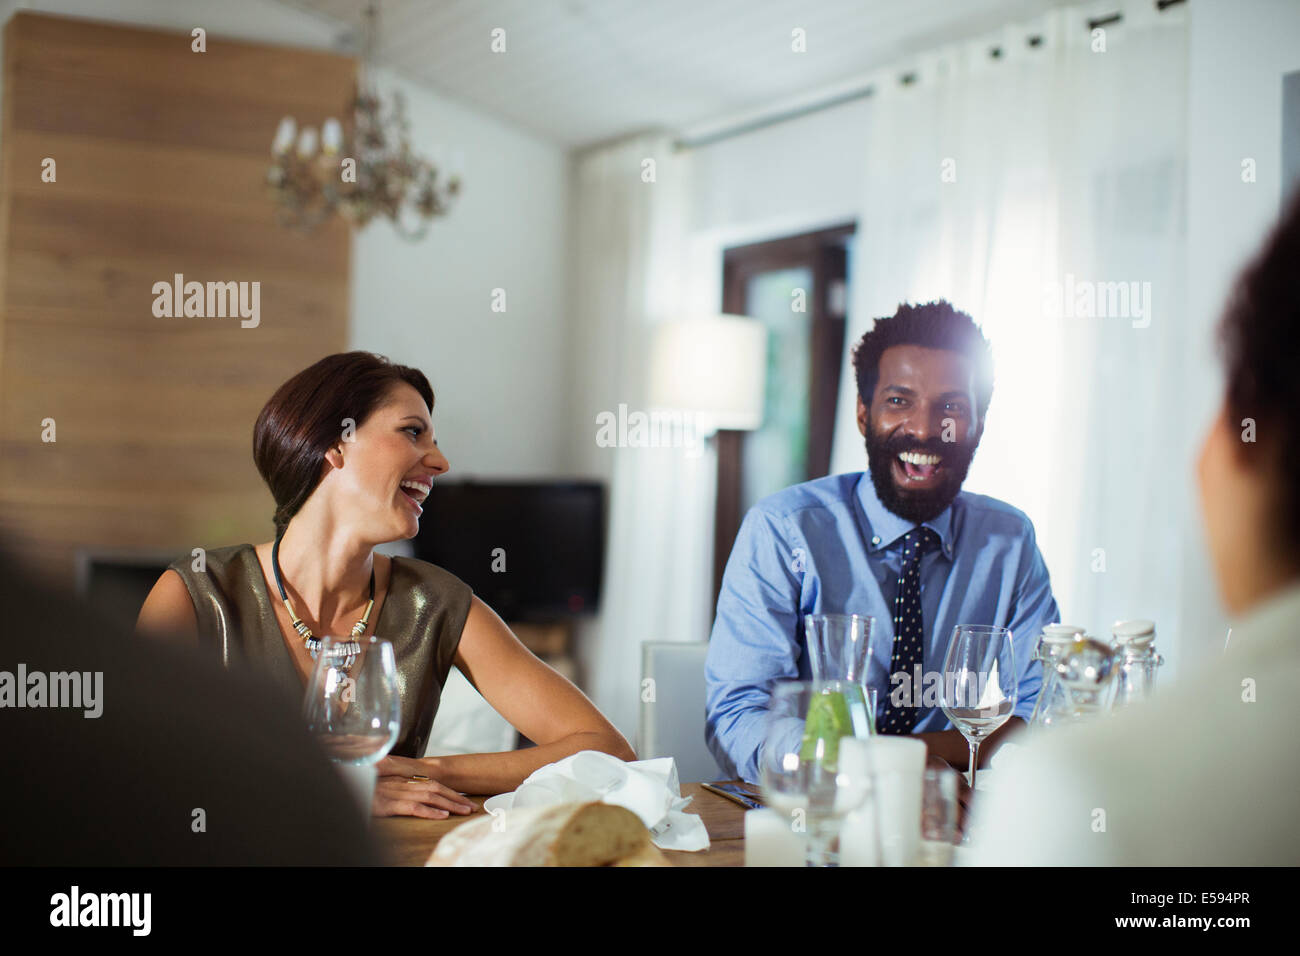 Friends laughing at dinner party Stock Photo